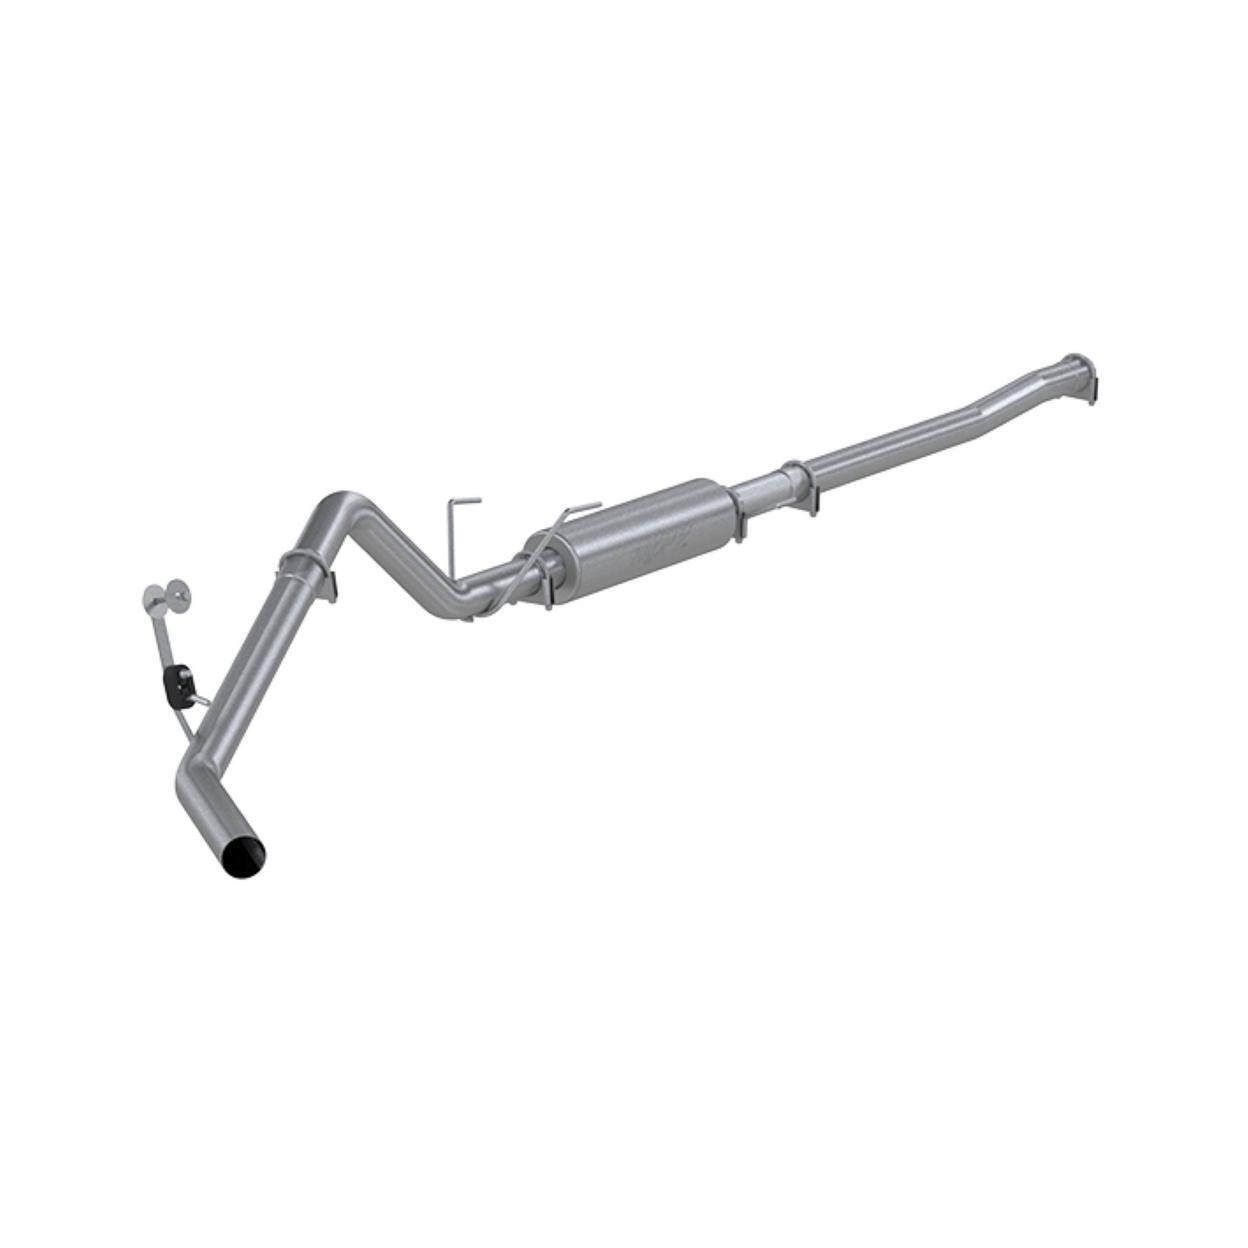 MBRP Exhaust S5148P-PV Exhaust System Kit for 2007 Dodge Ram 3500